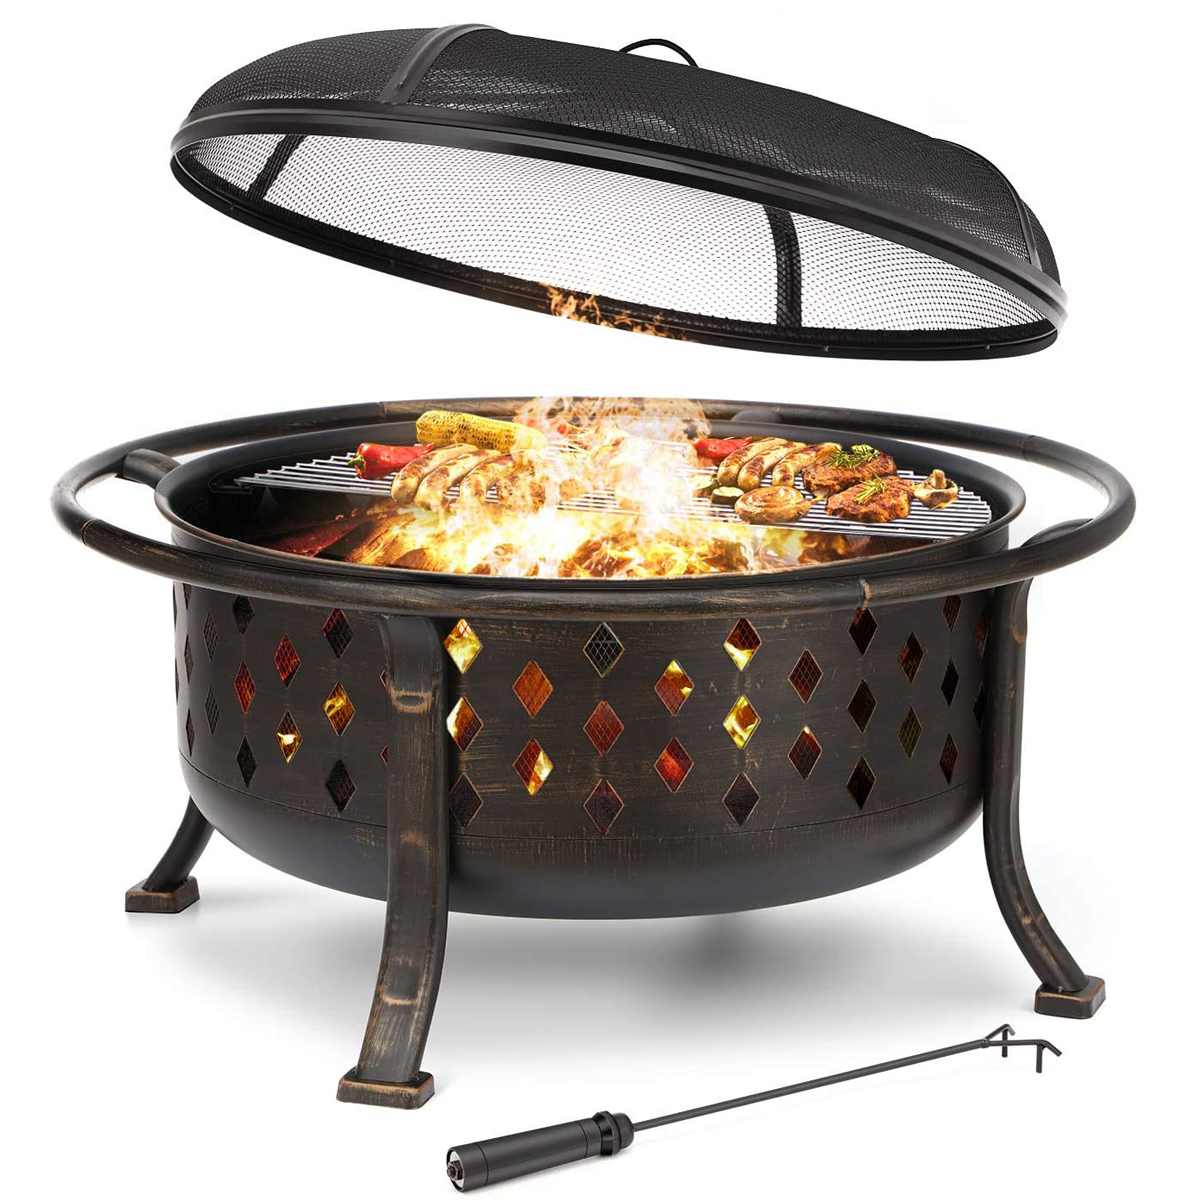 Kingso 36 Fire Pit Outdoor Large Steel, Wood Burning Fire Pit Bowl